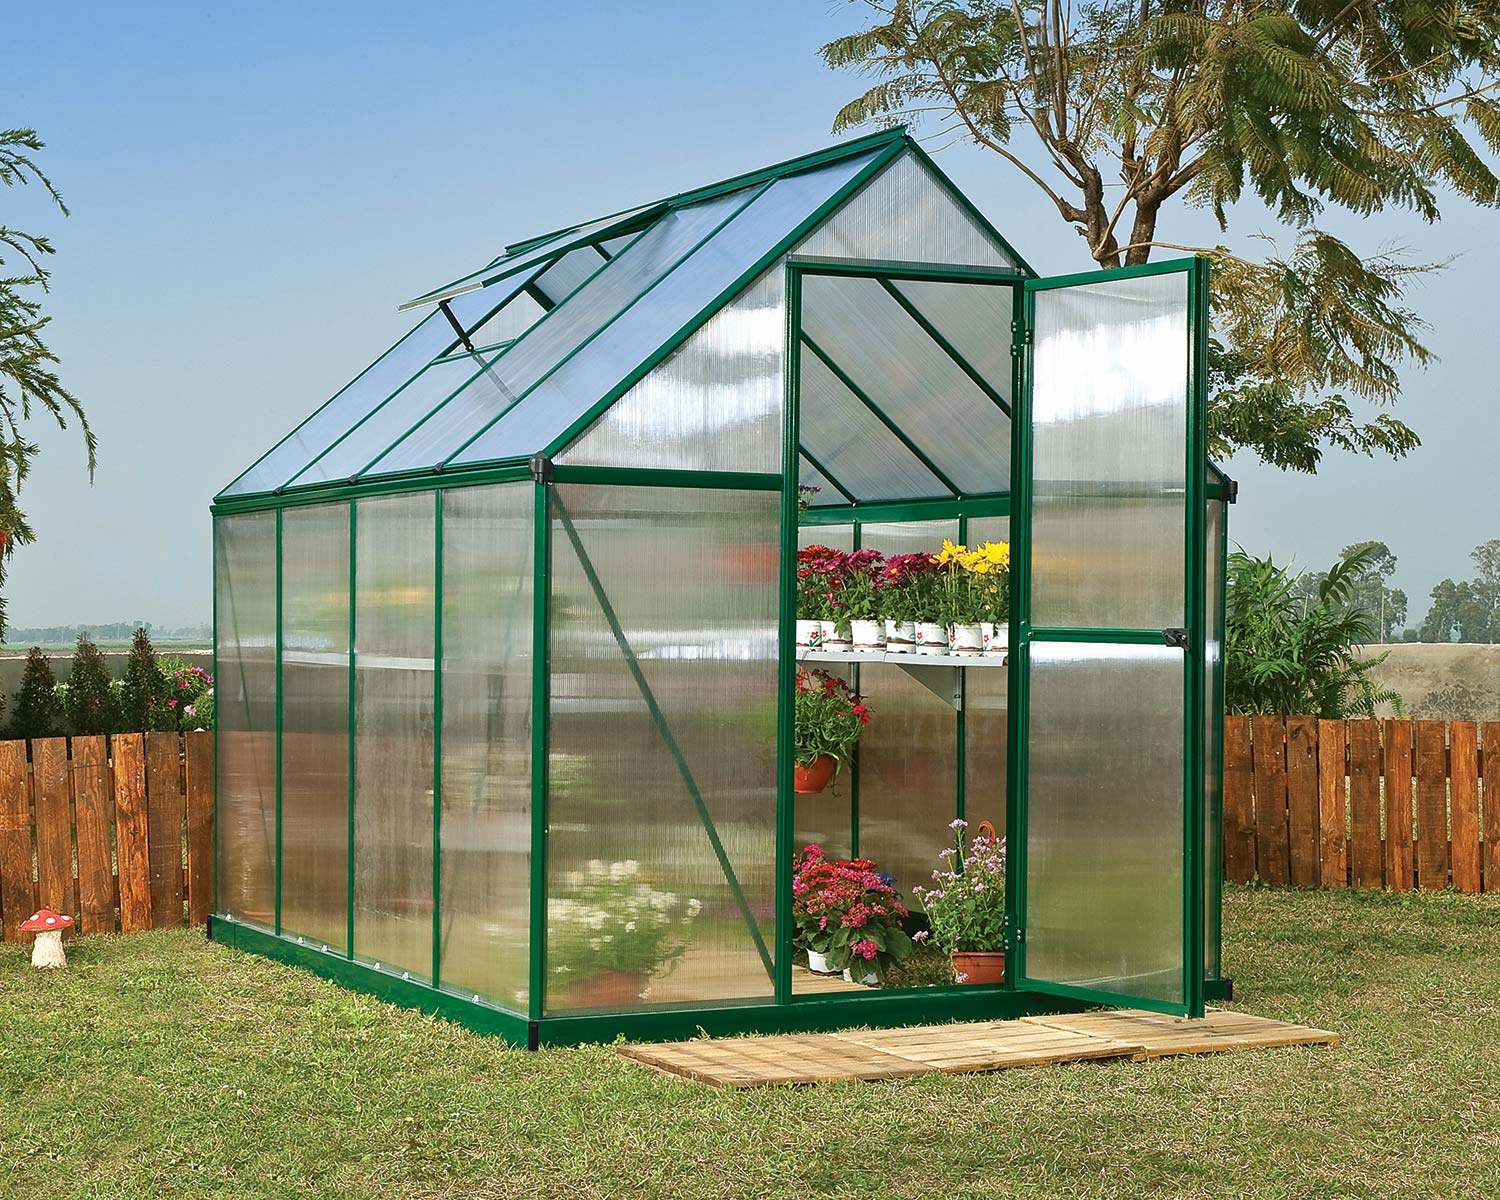 Mythos 6&#039; x 8&#039; Greenhouse Green Structure &amp; Twinwall Panels outside on a lawn